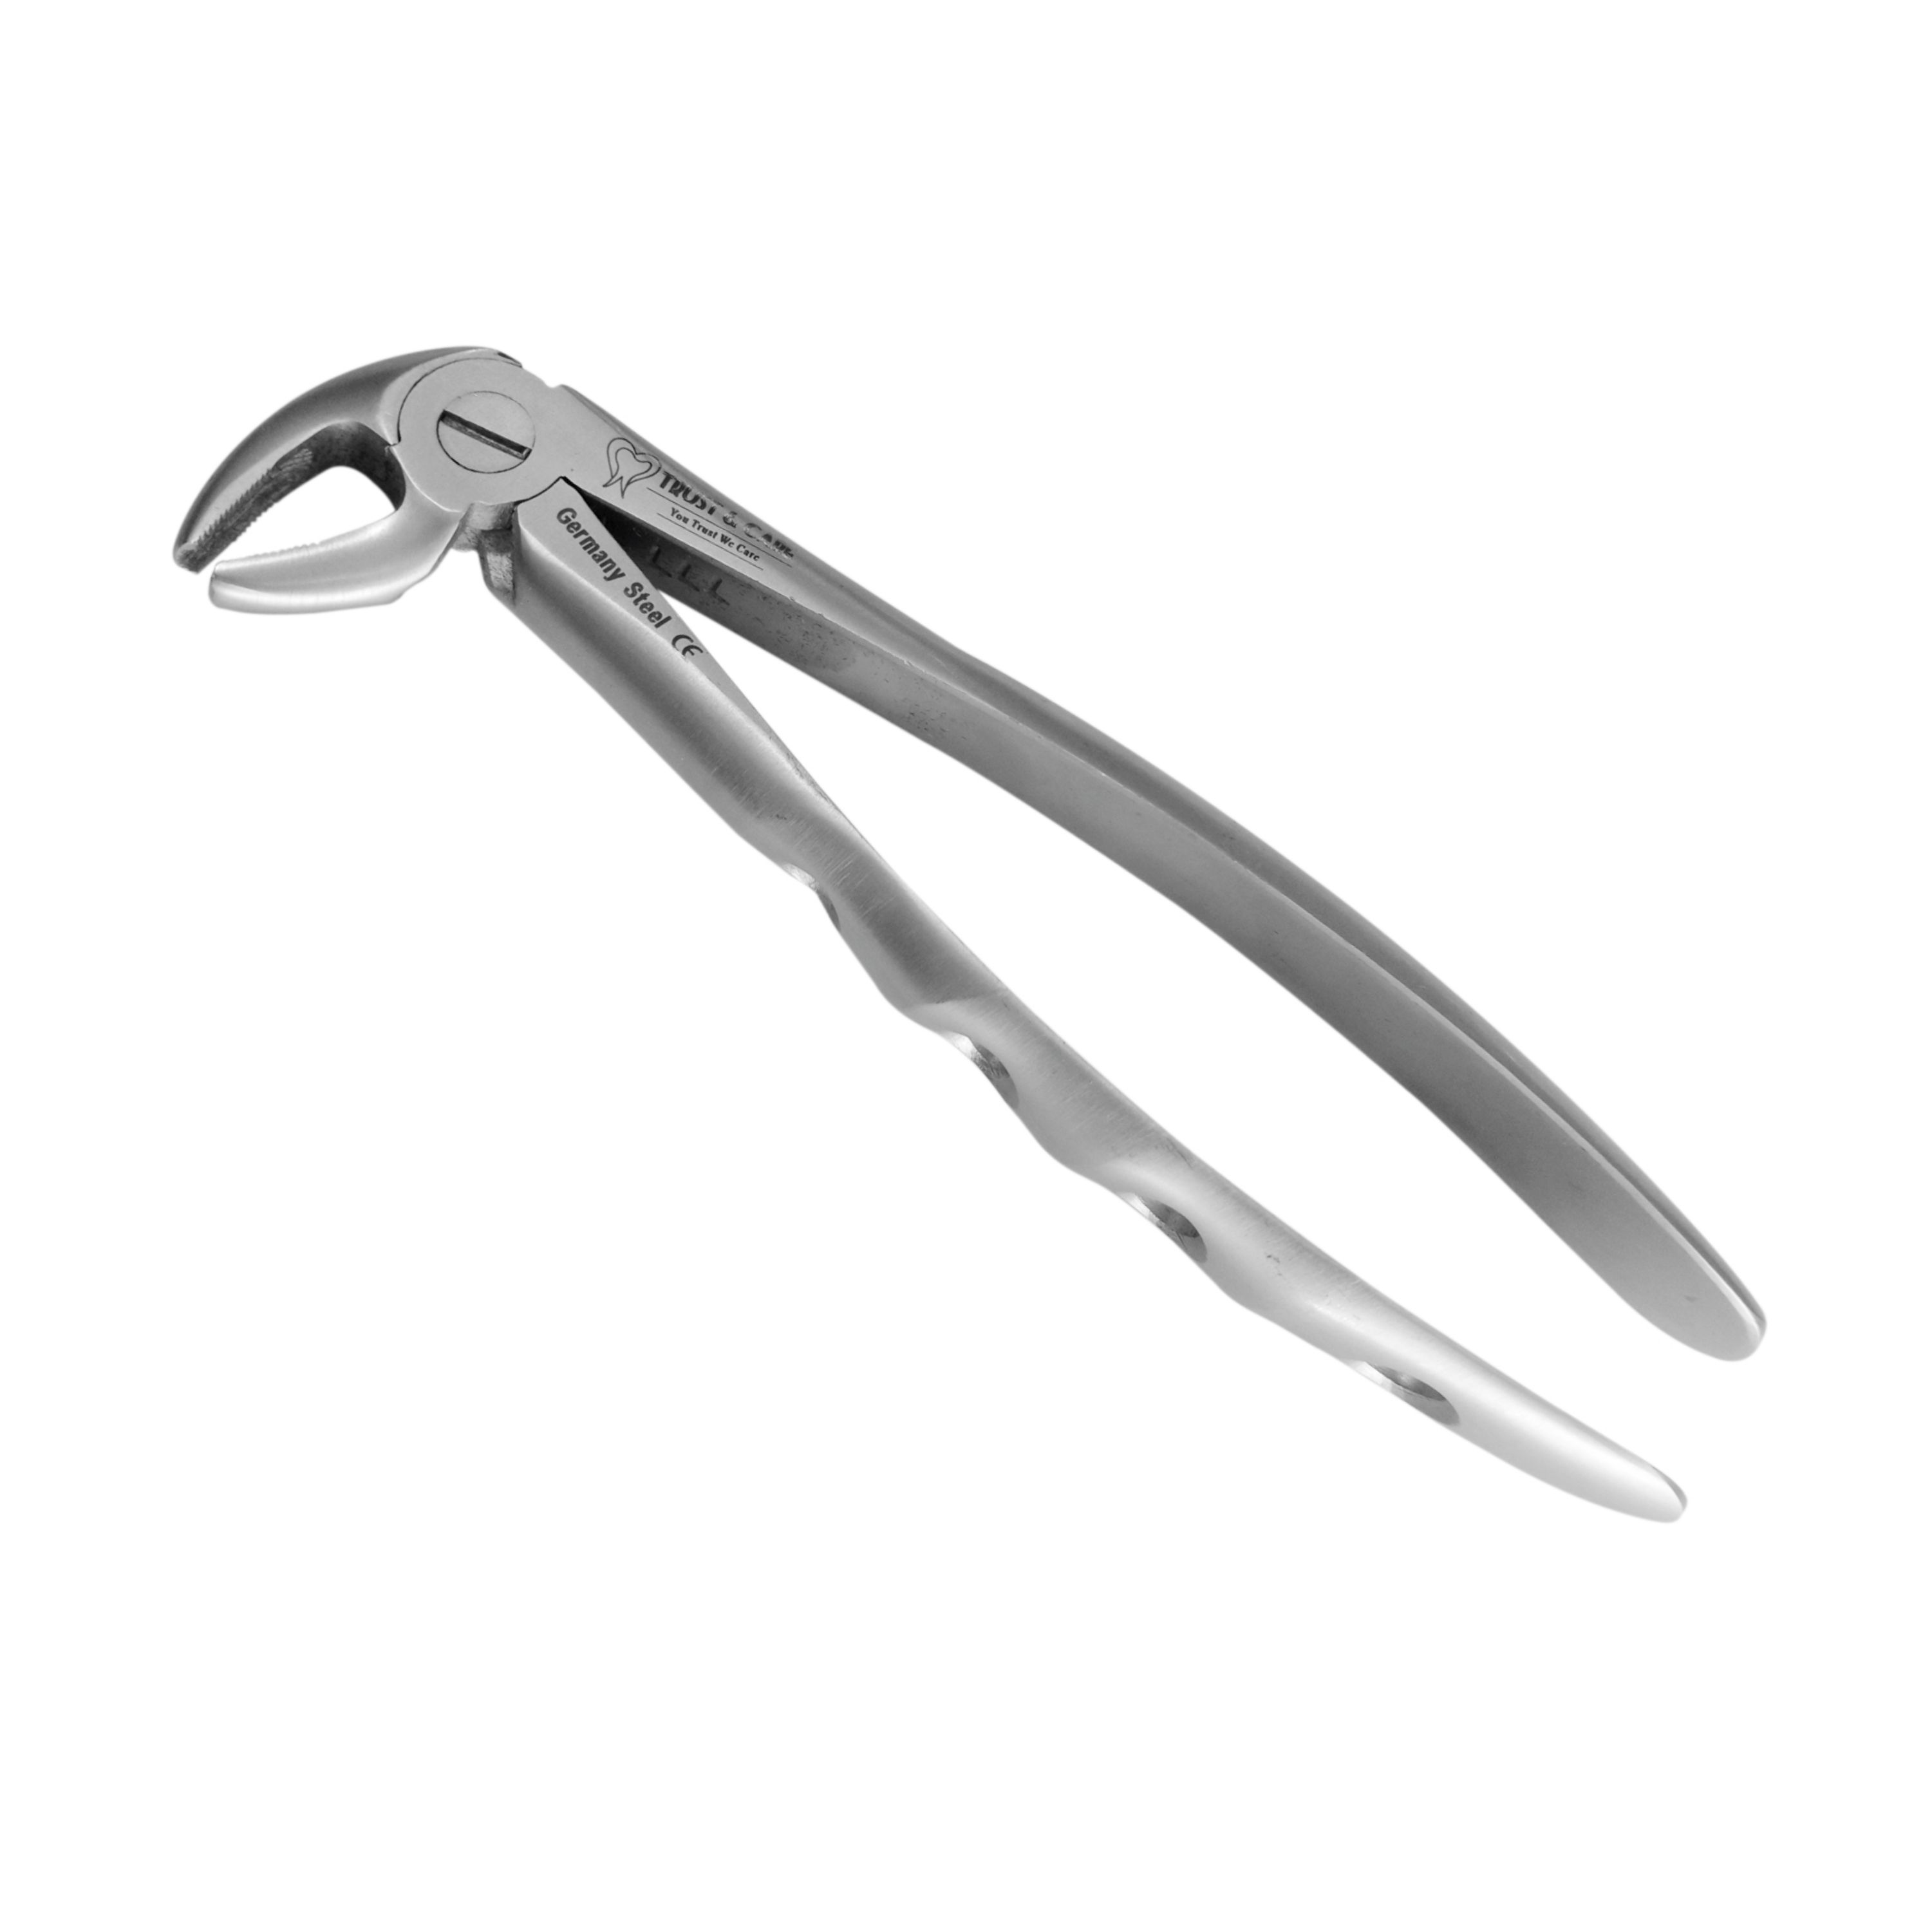 Trust & Care Tooth Extraction Forcep Lower Premolars Fig No. 13 Premium